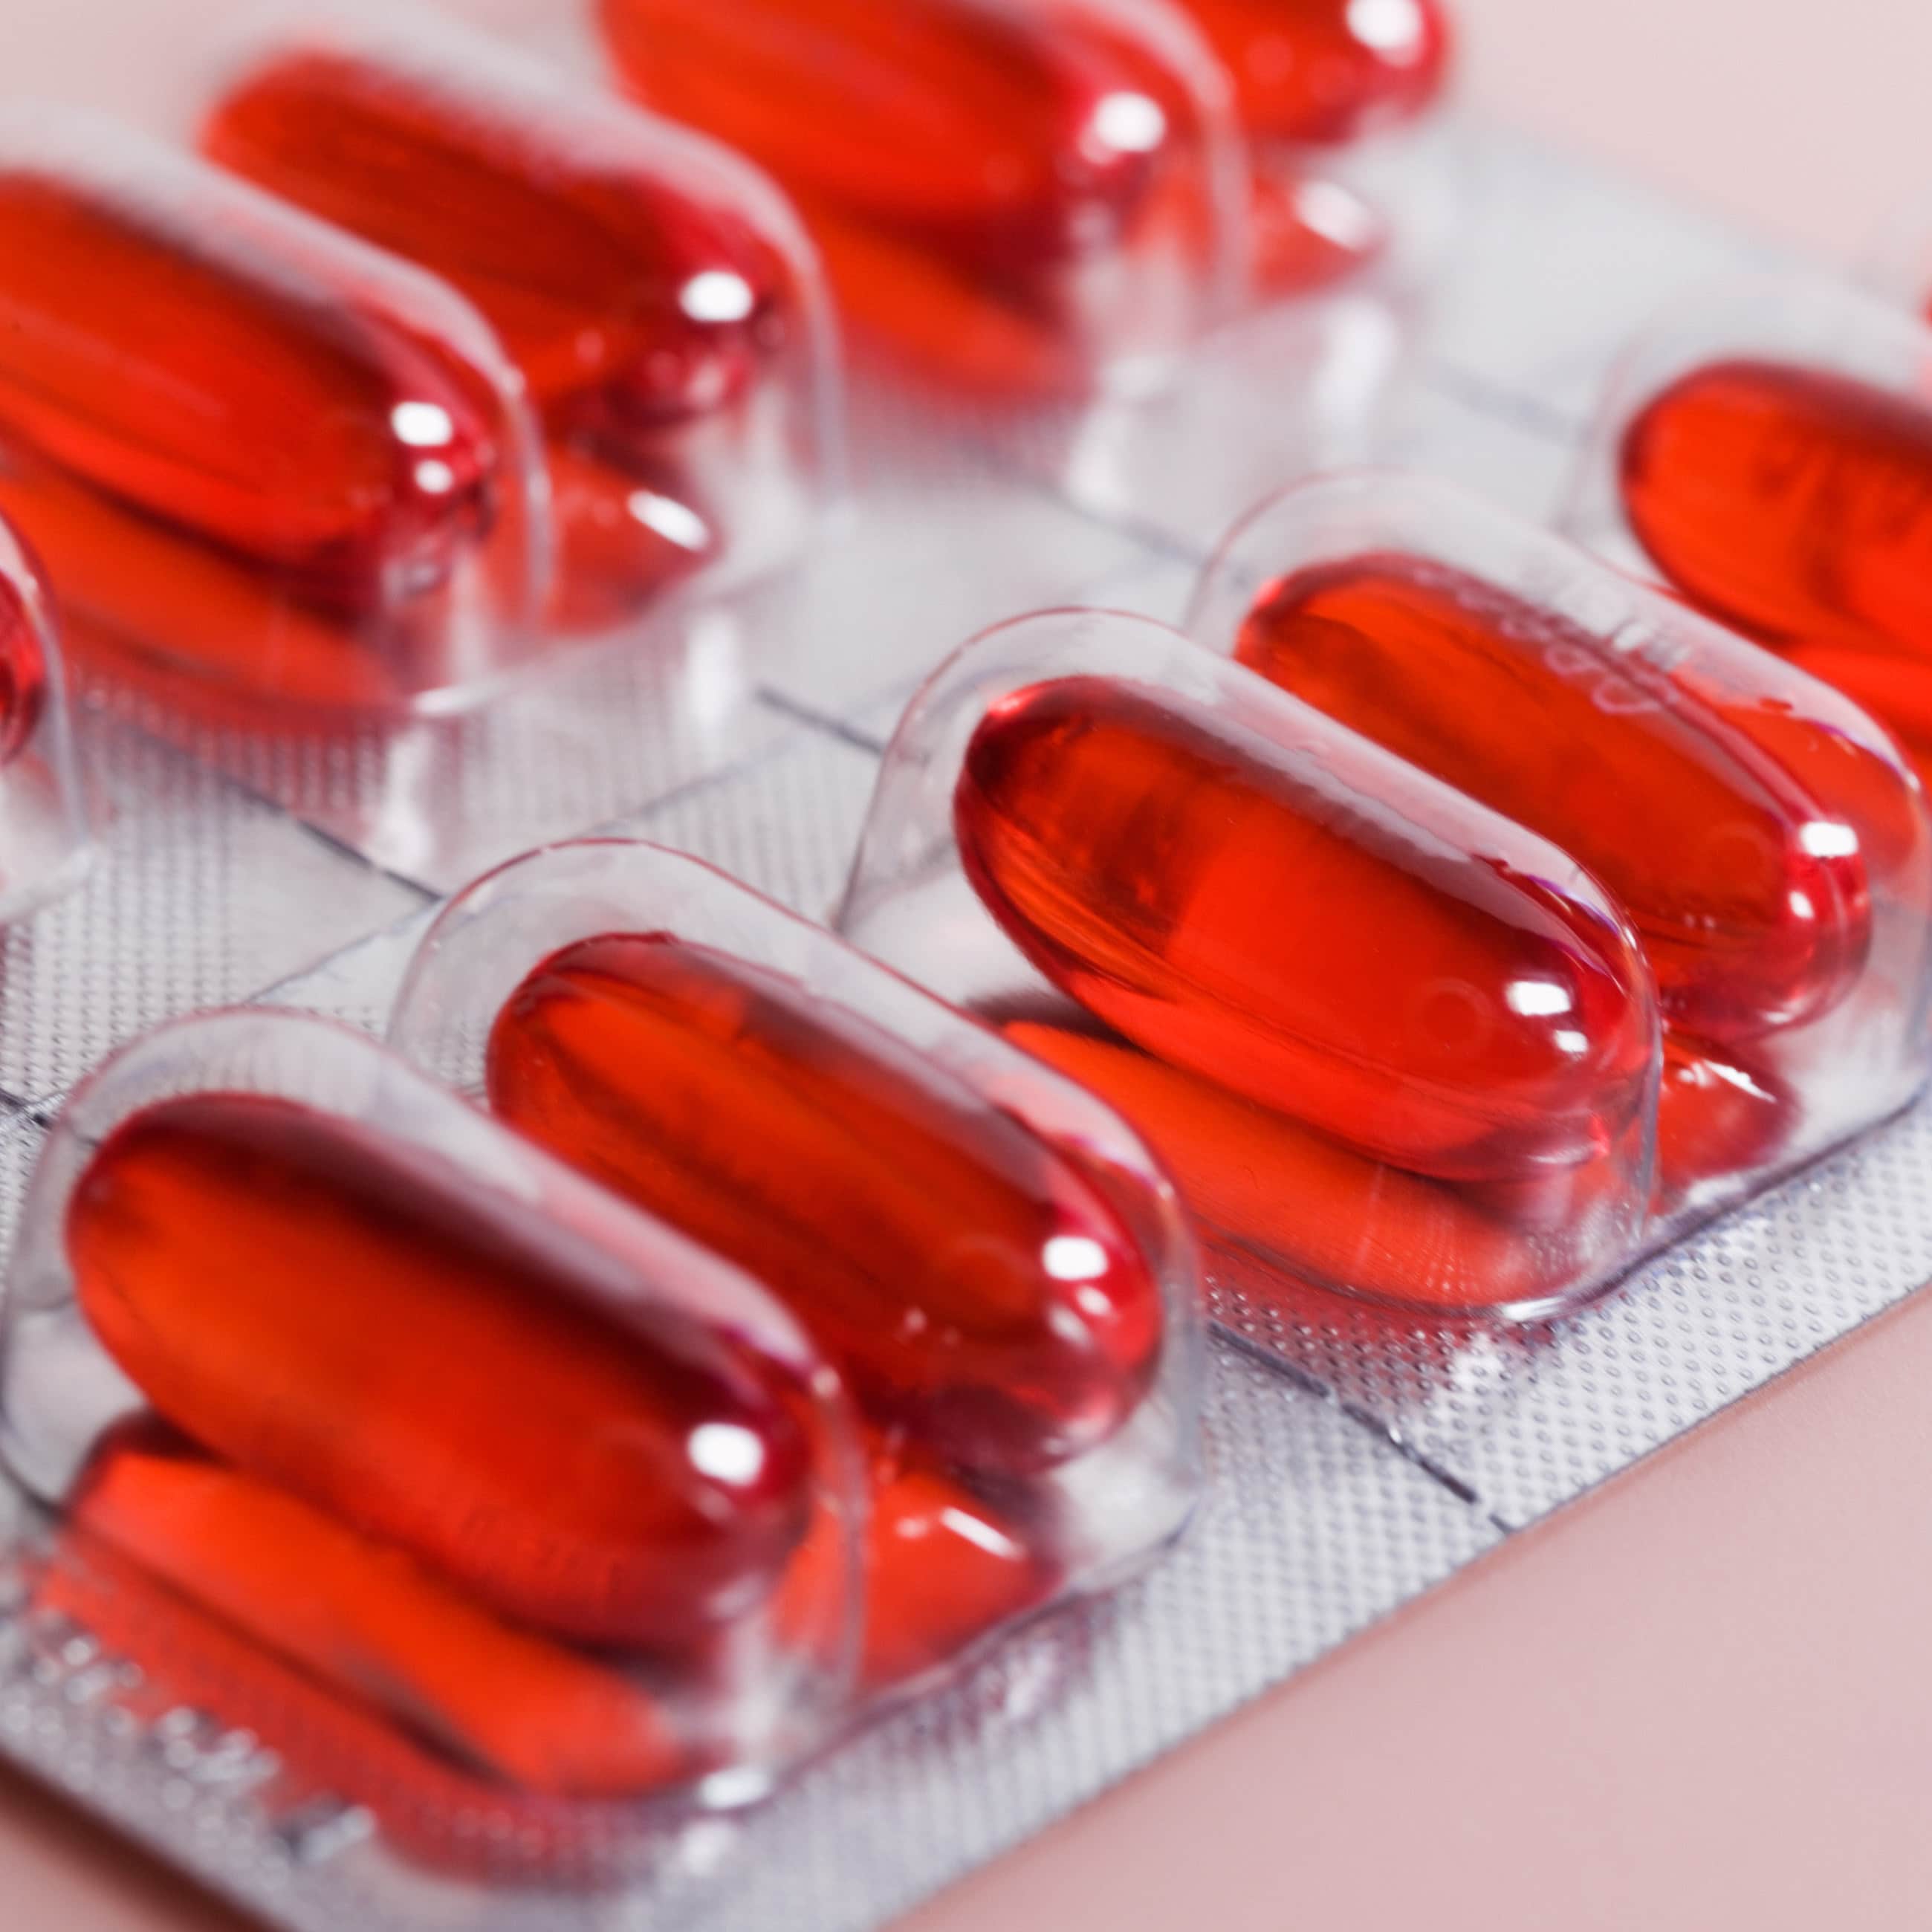 Pharmaceutical Contract Manufacturer, Peppina, Chooses SAP Business One